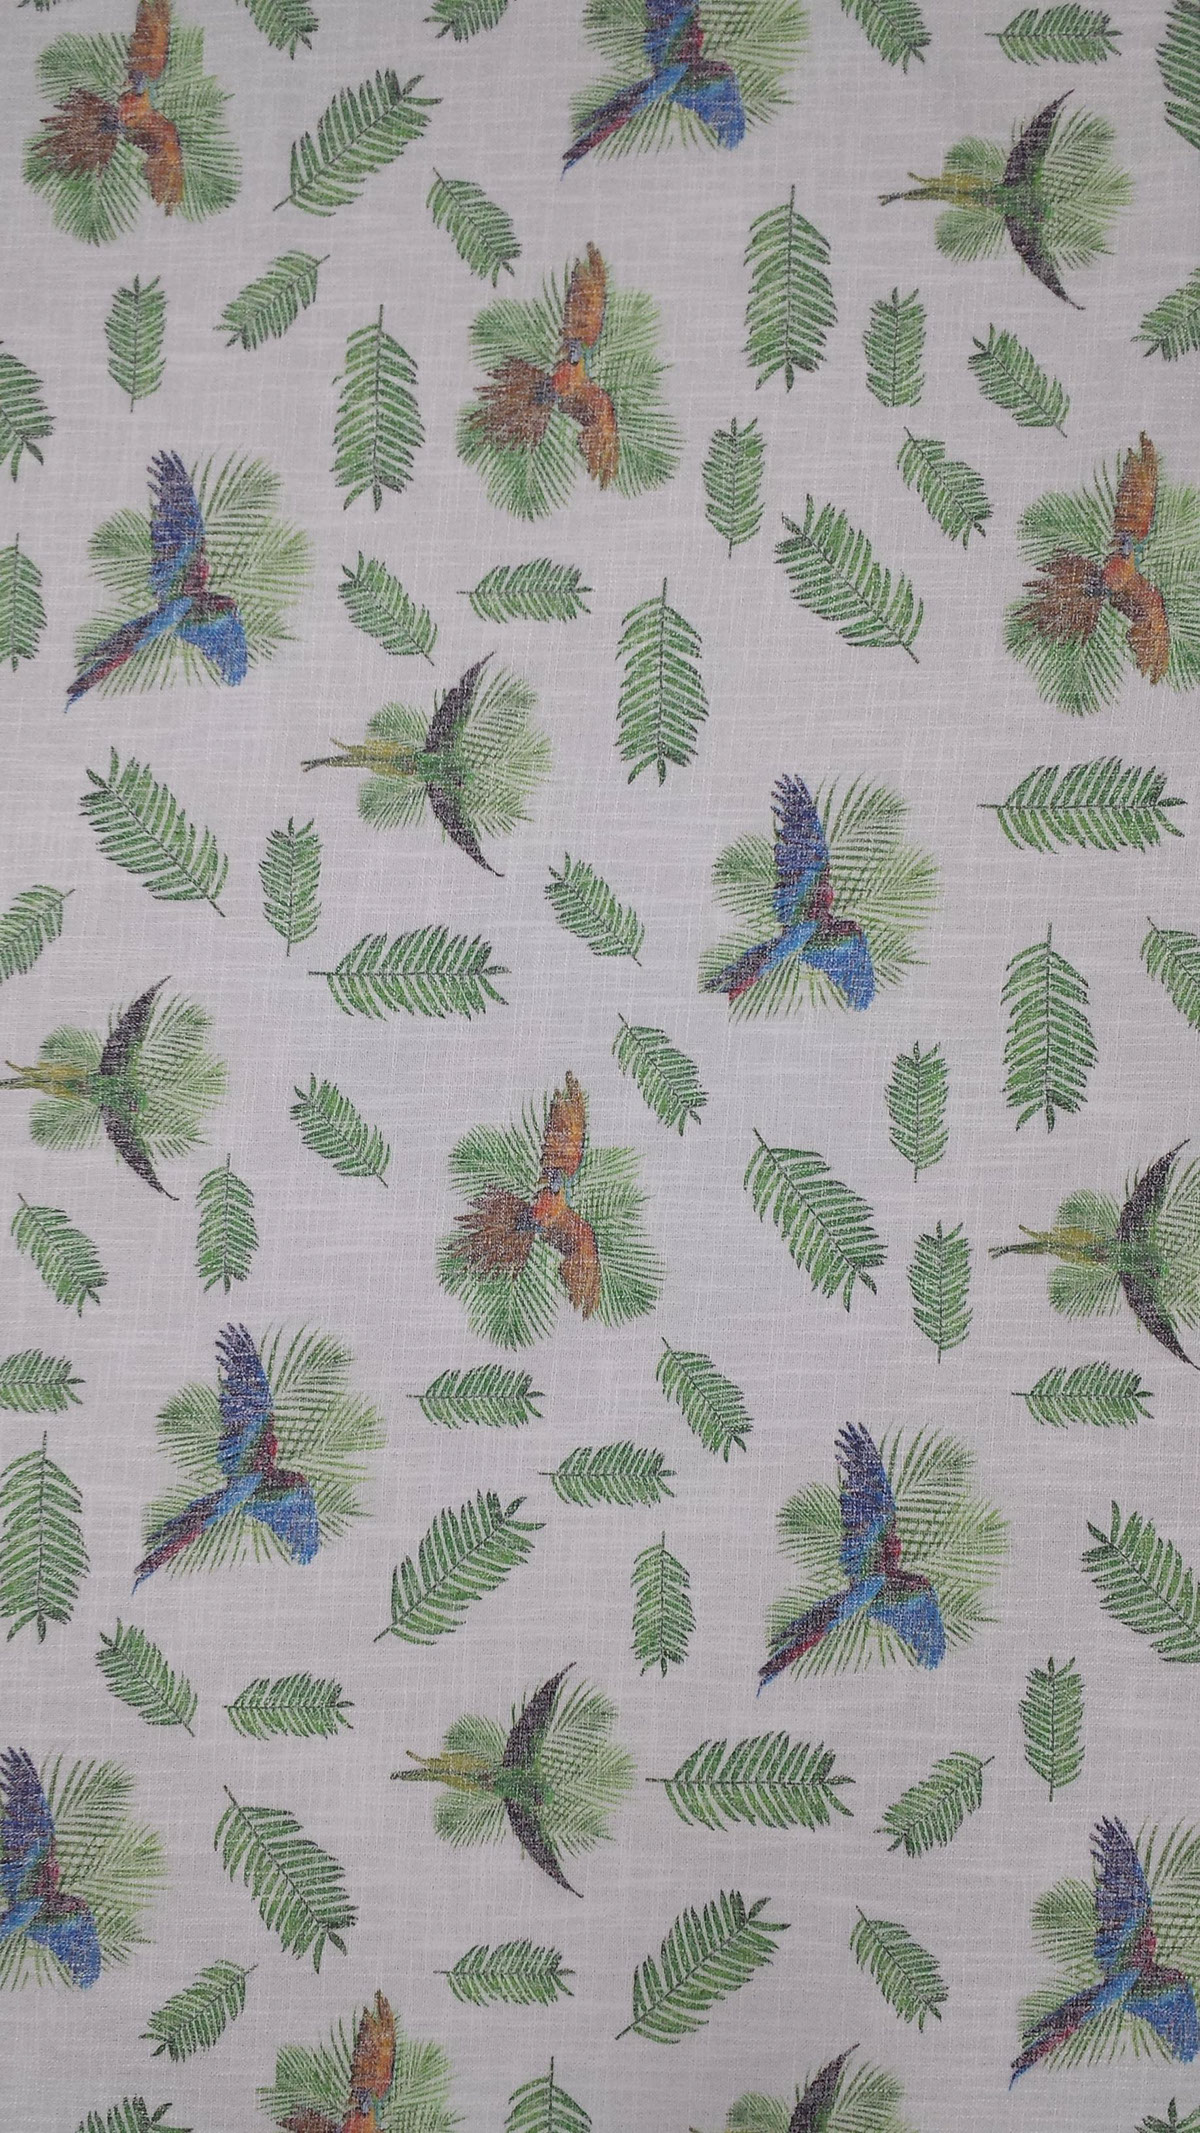 design fabric newcollection designfabric upholstery upholsteryfabric silvana galeriatextil birds colors